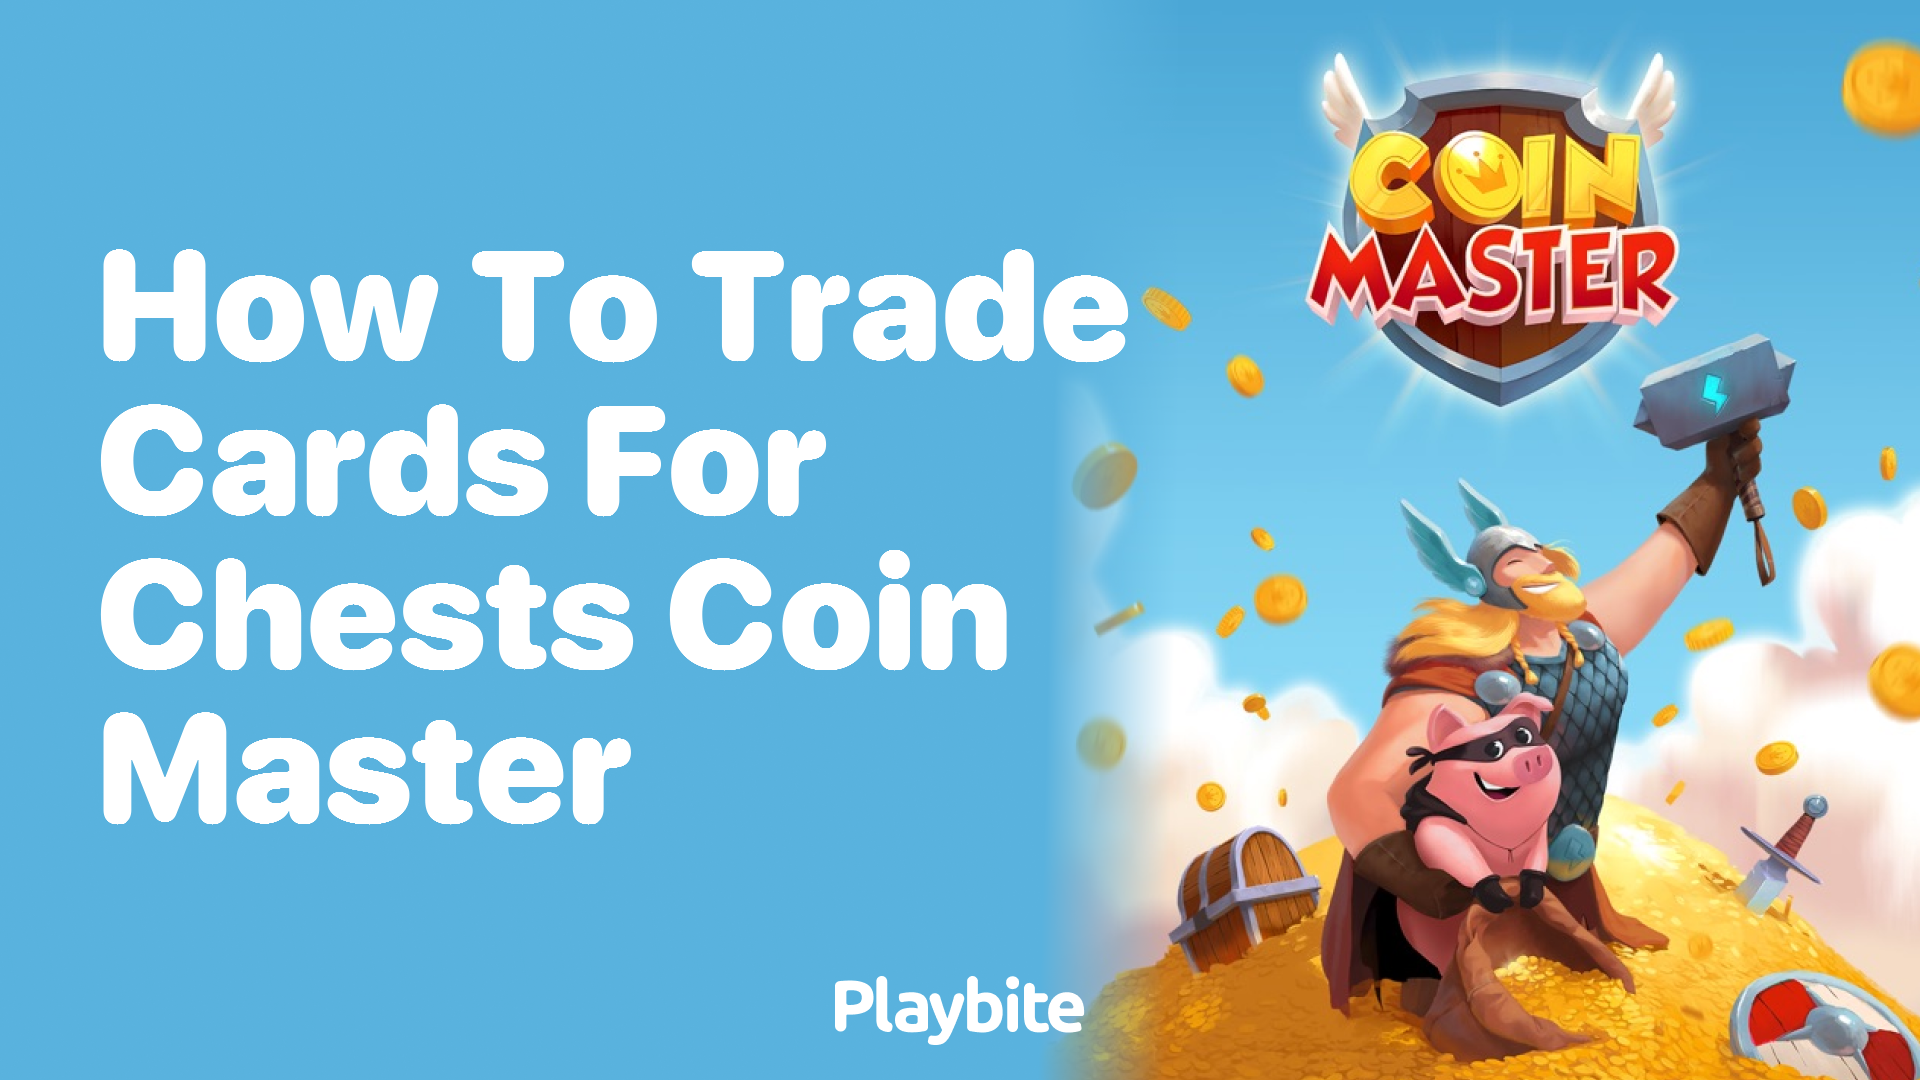 How to Exchange Cards for New Chests in Coin Master - Playbite